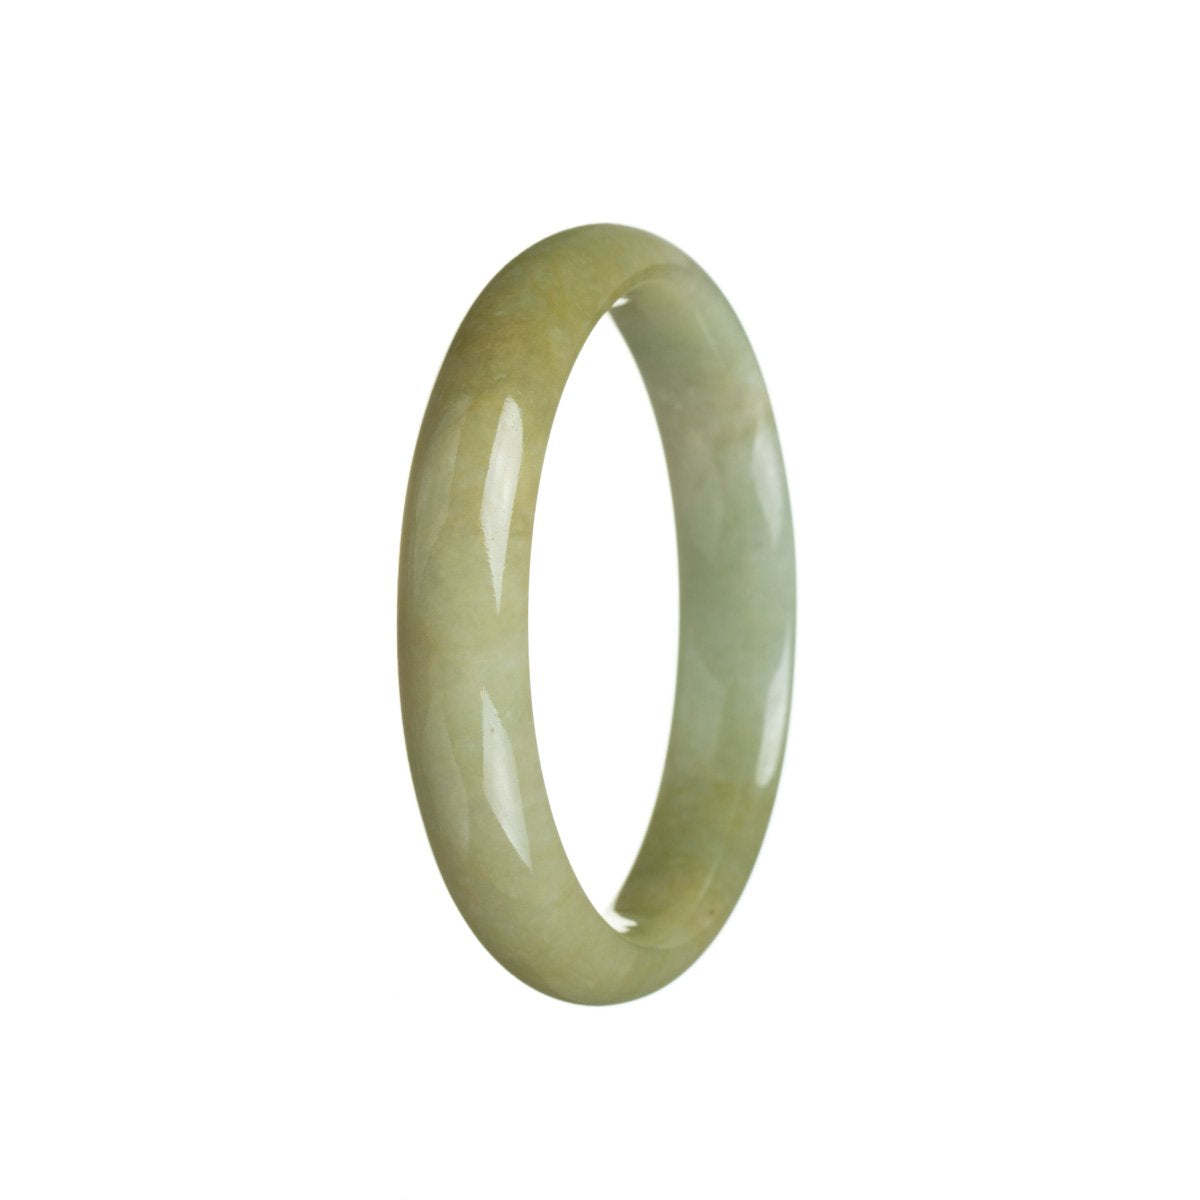 A beautiful brownish green jade bracelet in a half moon shape, crafted from genuine Grade A jade.